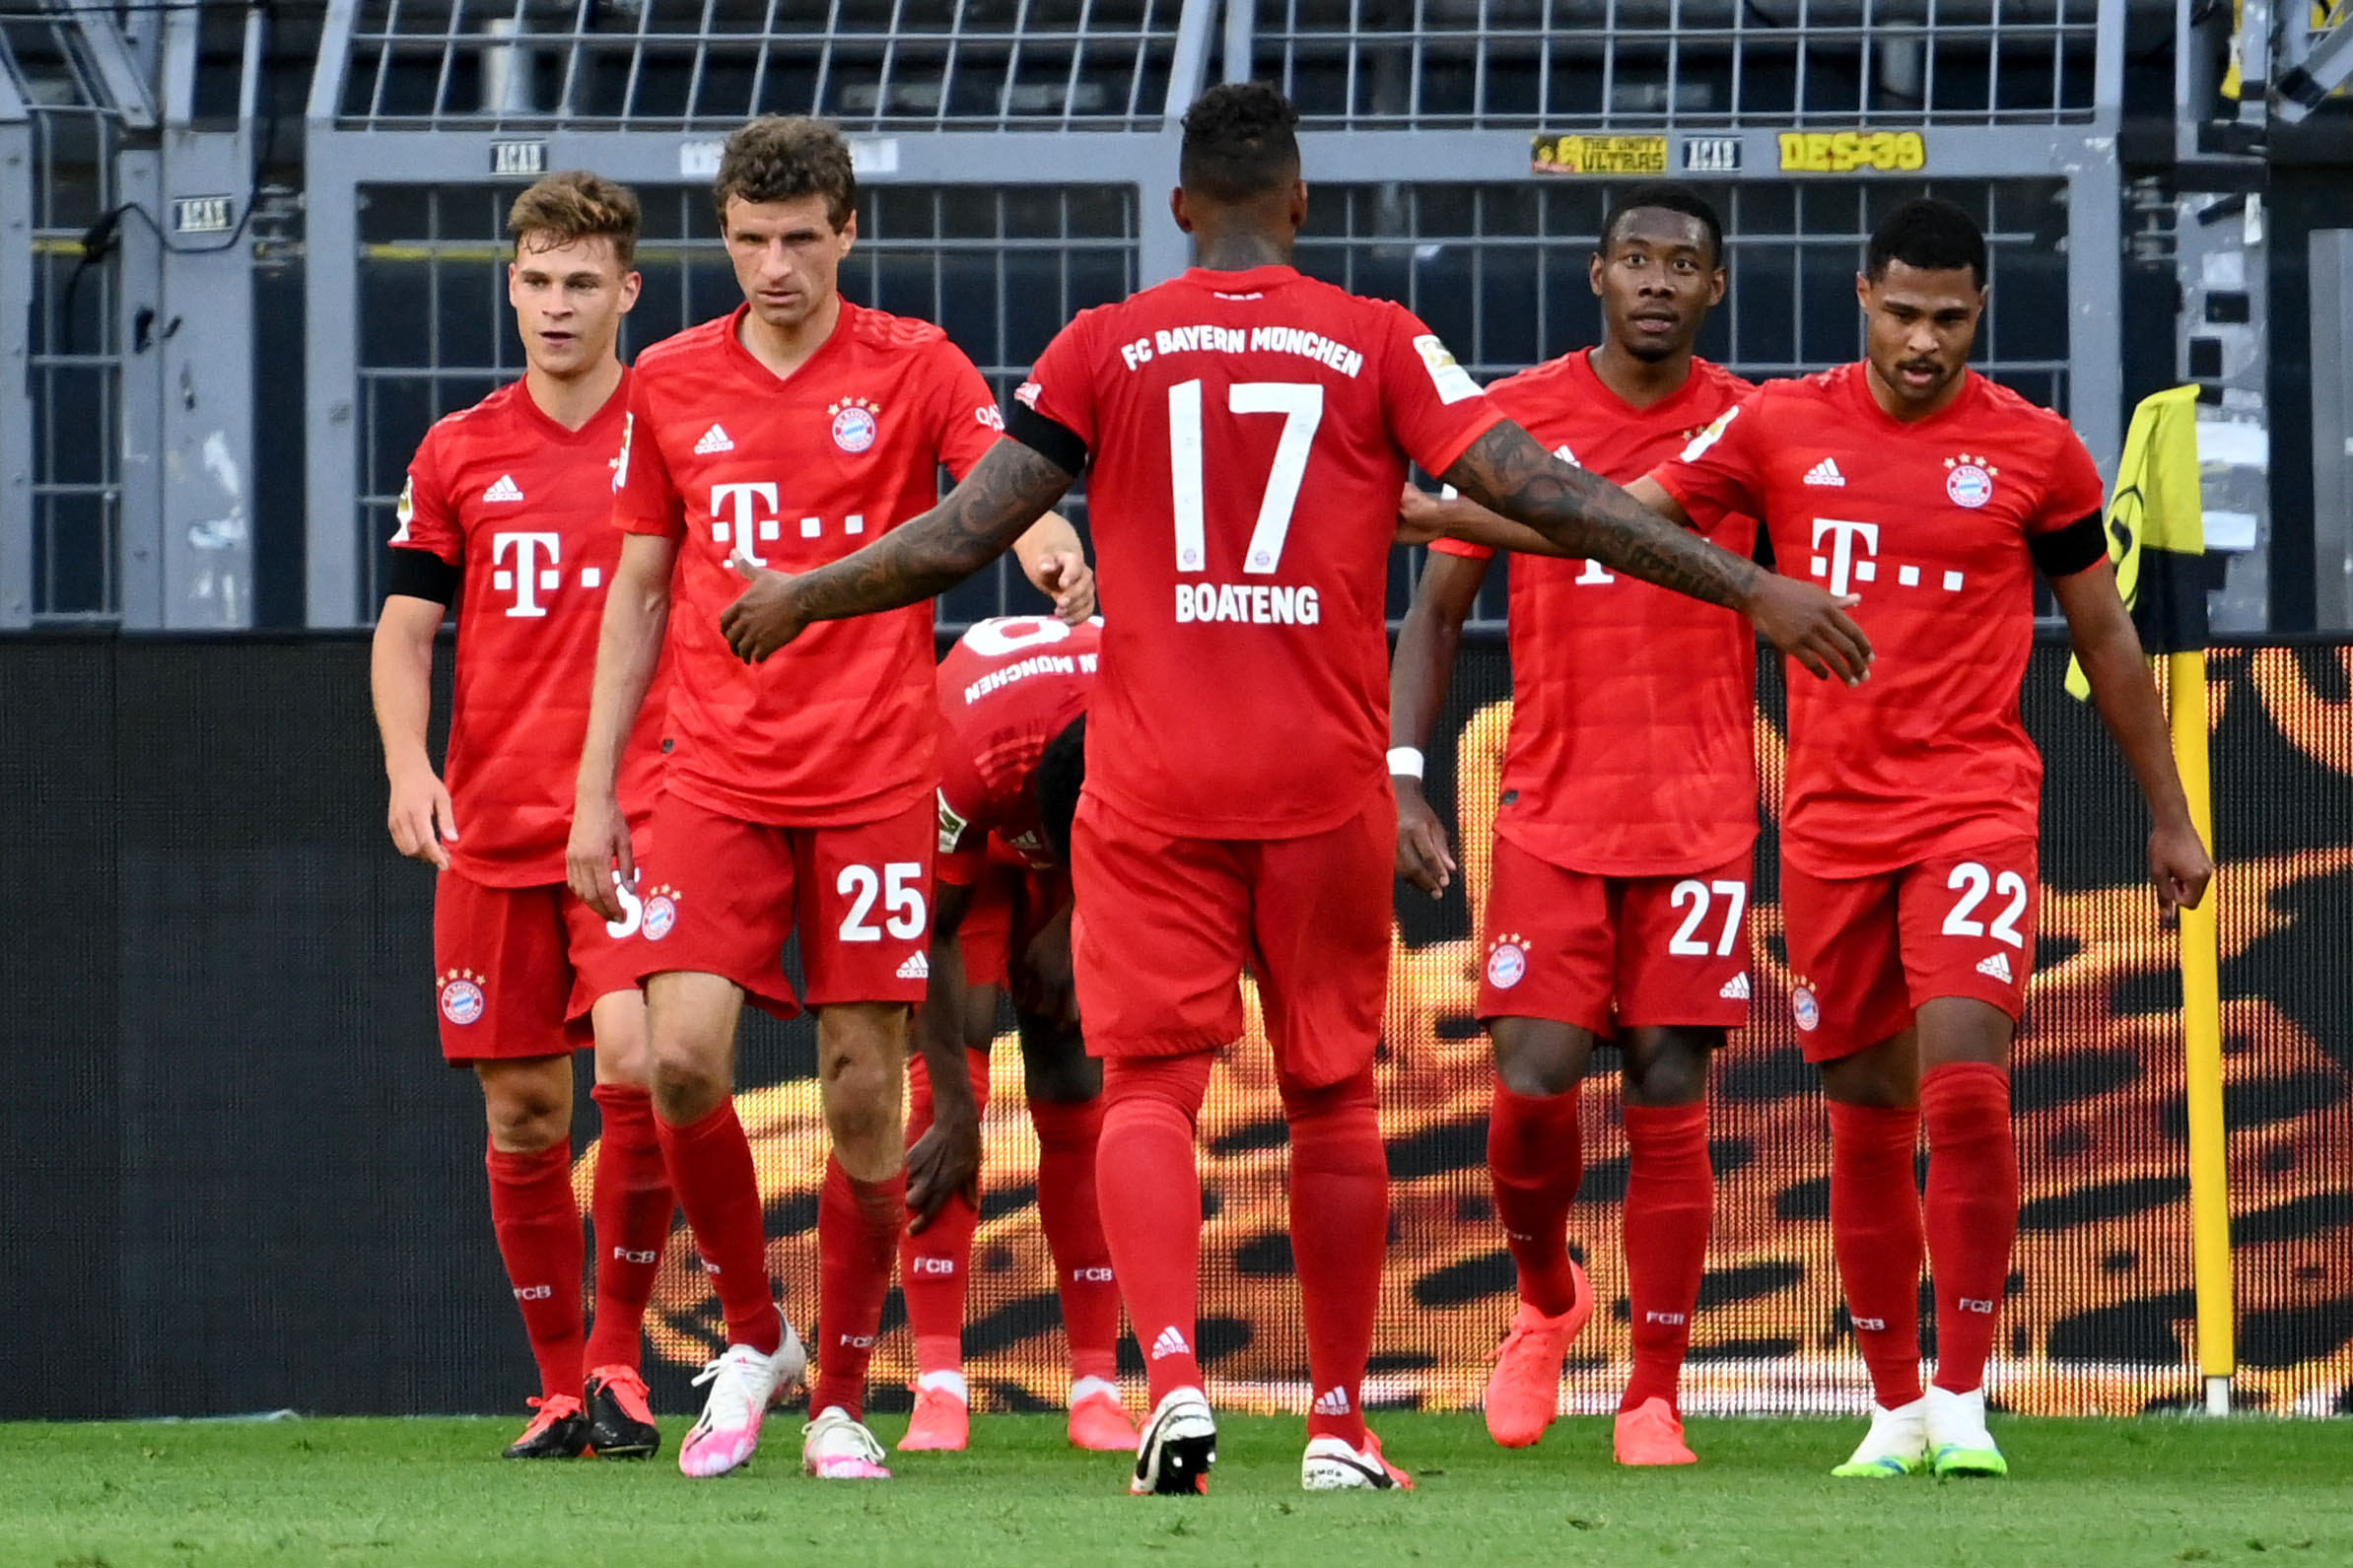 26 May 2020, Dortmund: Munich's Joshua Kimmich (L) celebrates scoring his side's first goal with teammates during the German Bundesliga soccer match between Borussia Dortmund and FC Bayern Munich at Signal Iduna Park. Photo: /dpa - IMPORTANT NOTICE: DFL and DFB regulations prohibit any use of photographs as image sequences and/or quasi-video.